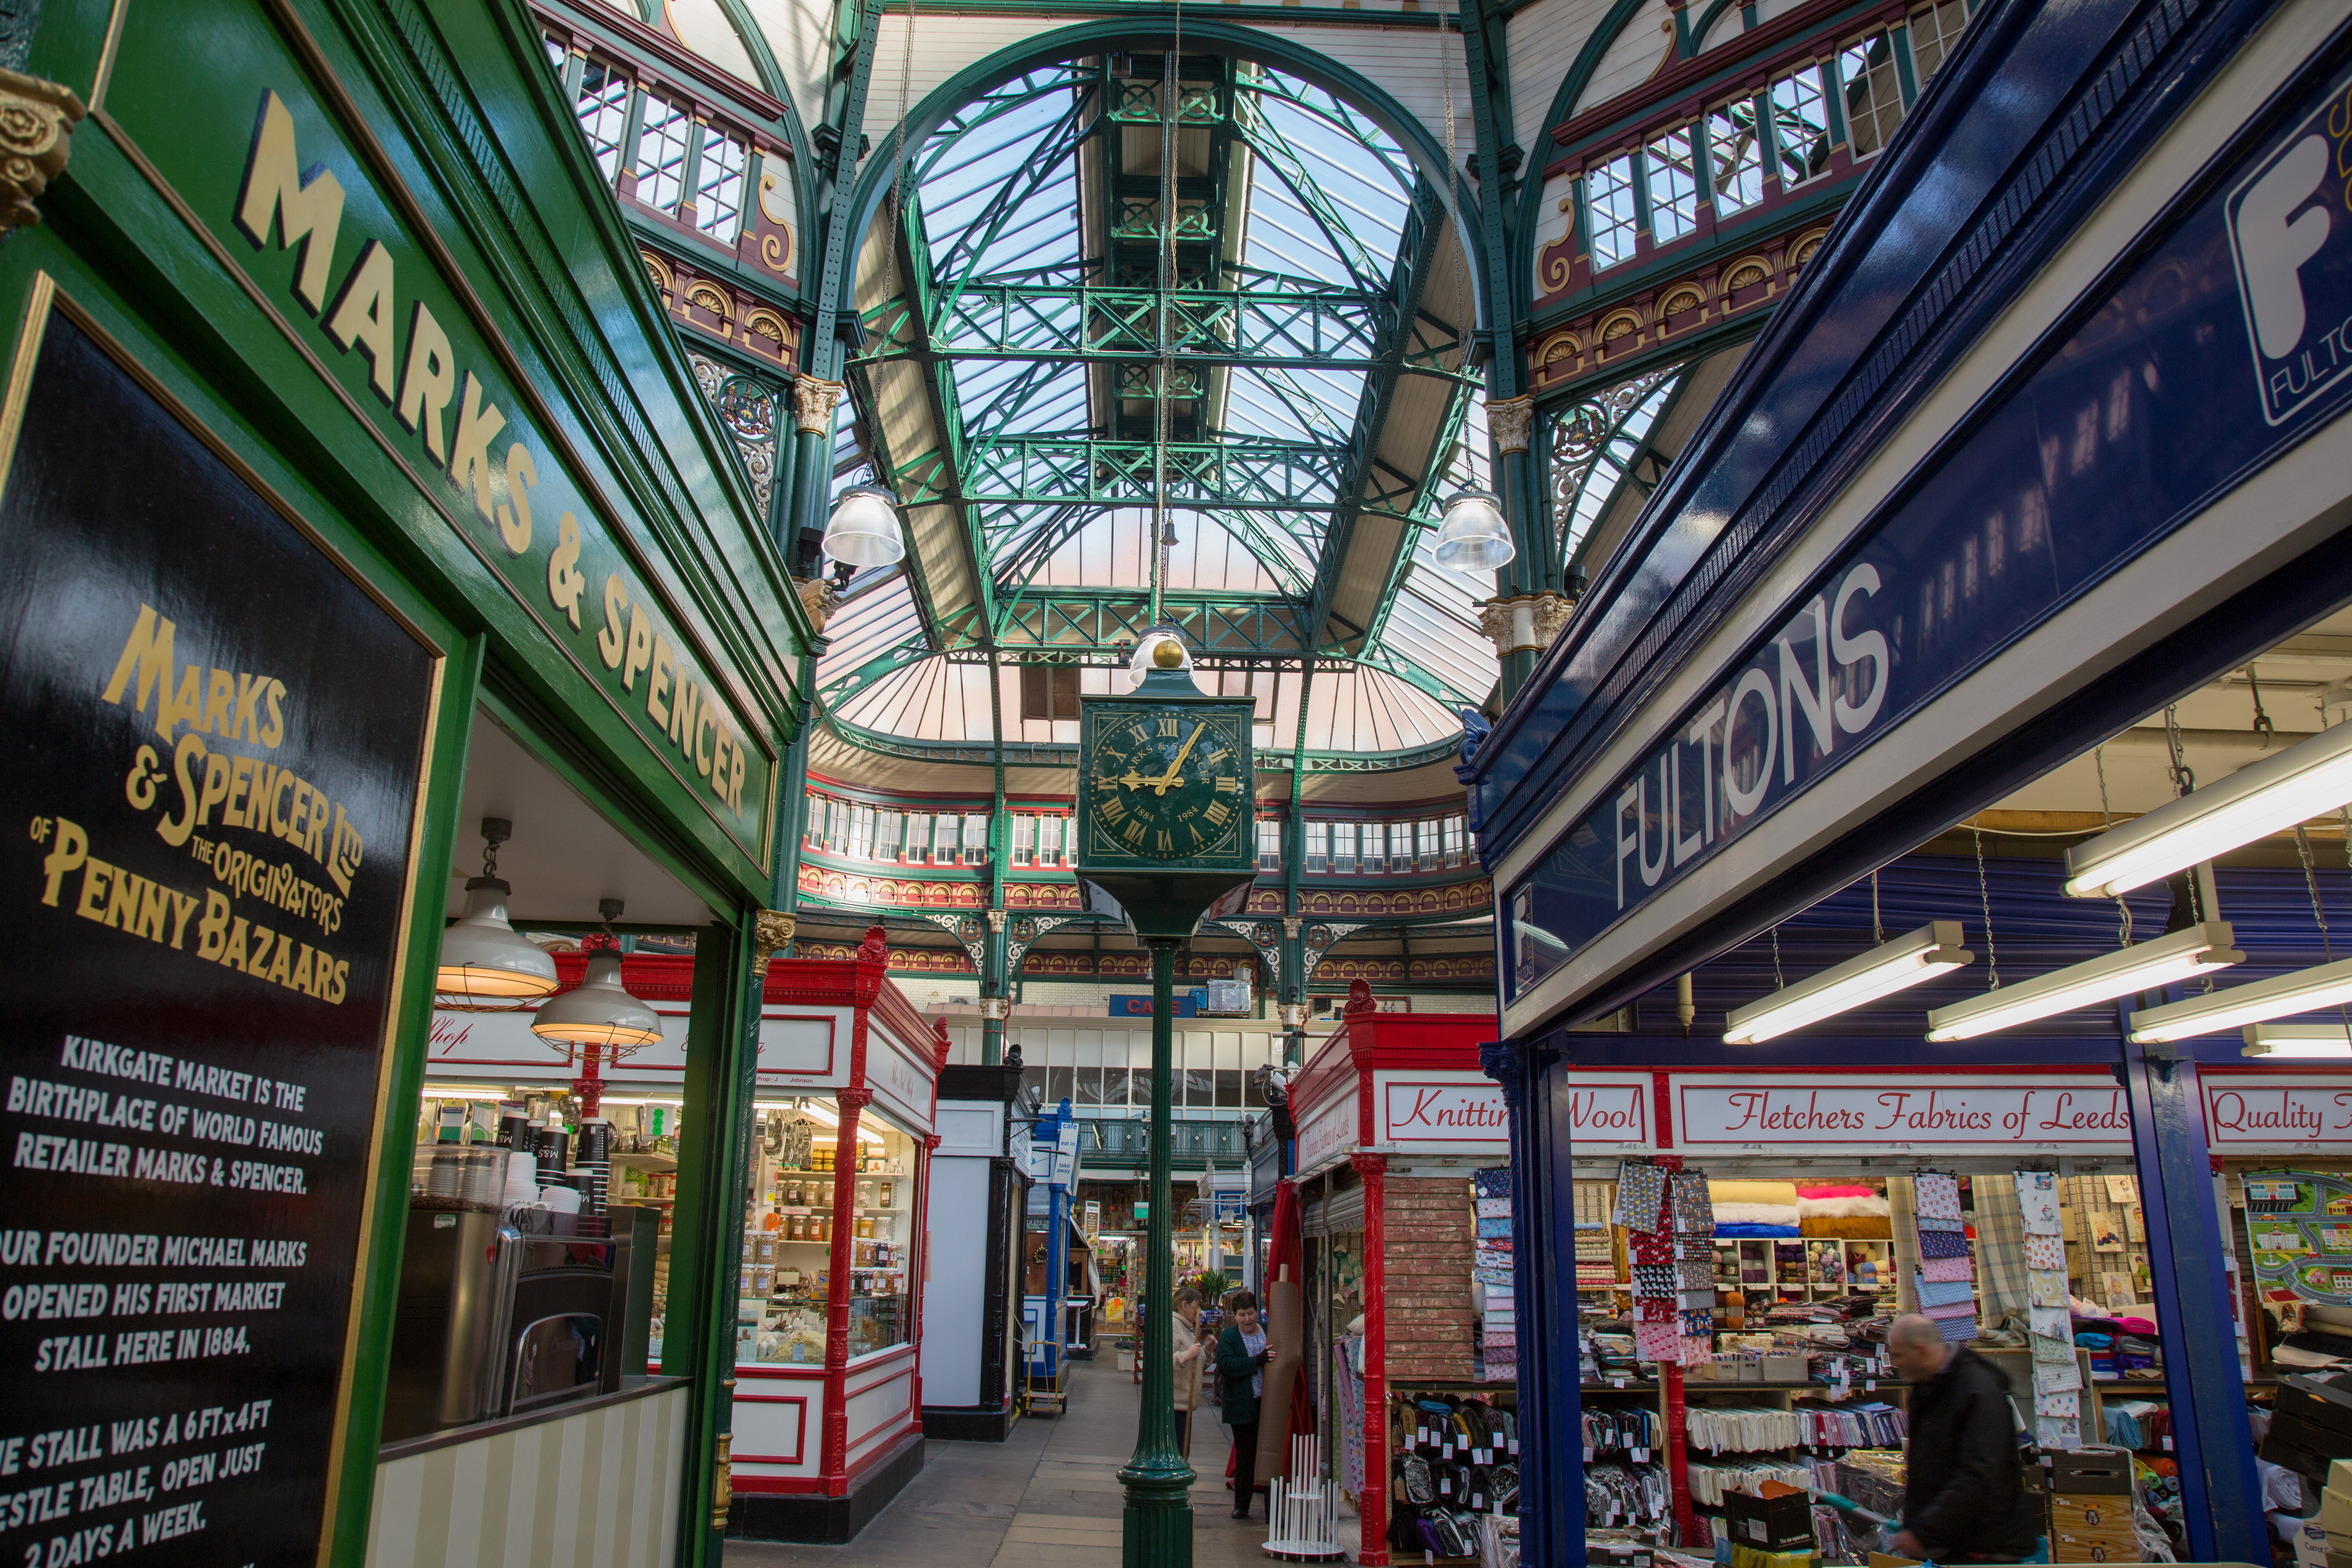 M&S stall and other market stalls in Kirkgate Market